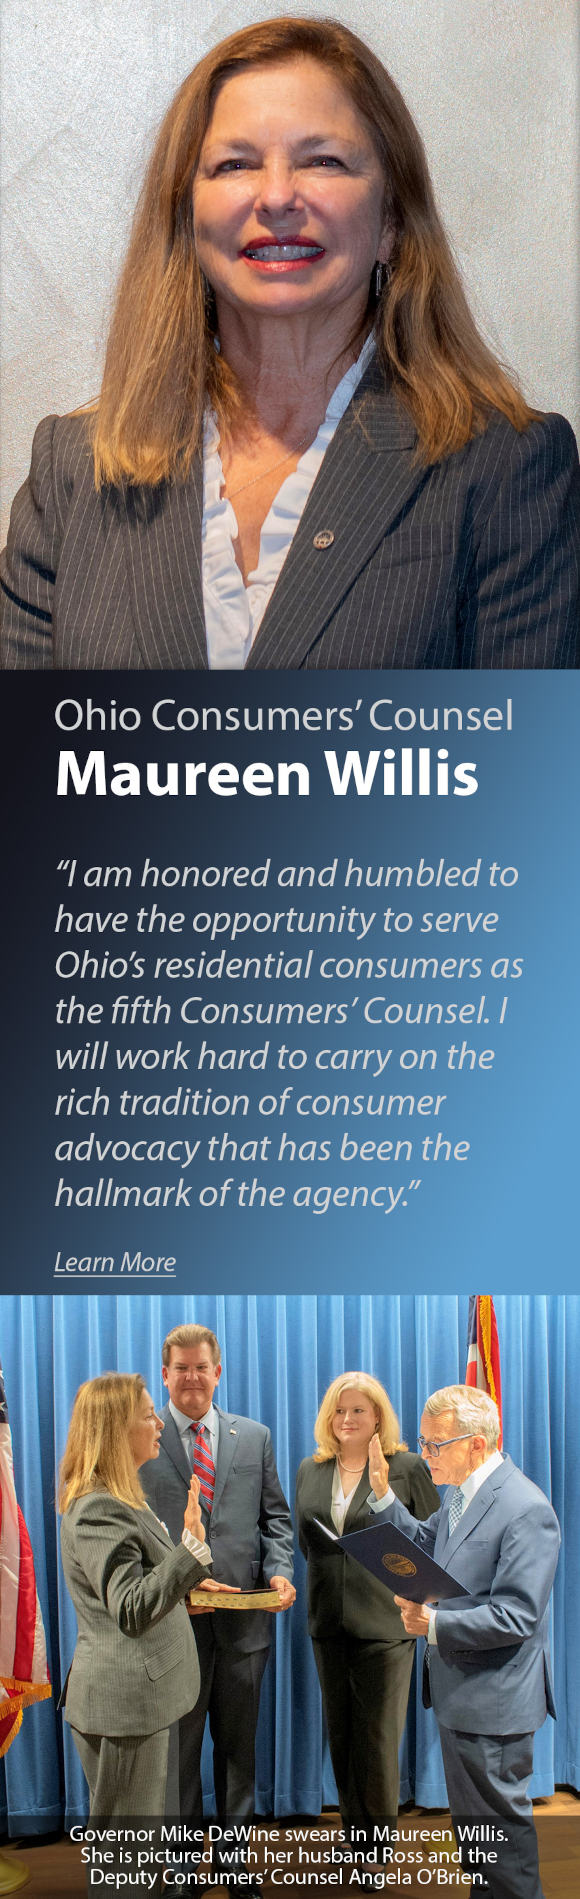 Ohio Consumers' Counsel Maureen Willis - I am honored and humbled to have the opportunity to server Ohio's residential consumers as the fifth Consumers' Counsel. I will work hard to carry on the rich tradition of consumer advocacy that has been the hallmark of the agency. Photo of Governor Mike DeWine swears in Maureen Willis. She is pictured with her husband Ross and the Deputy Consumers' Counsel Angela O'Brien.